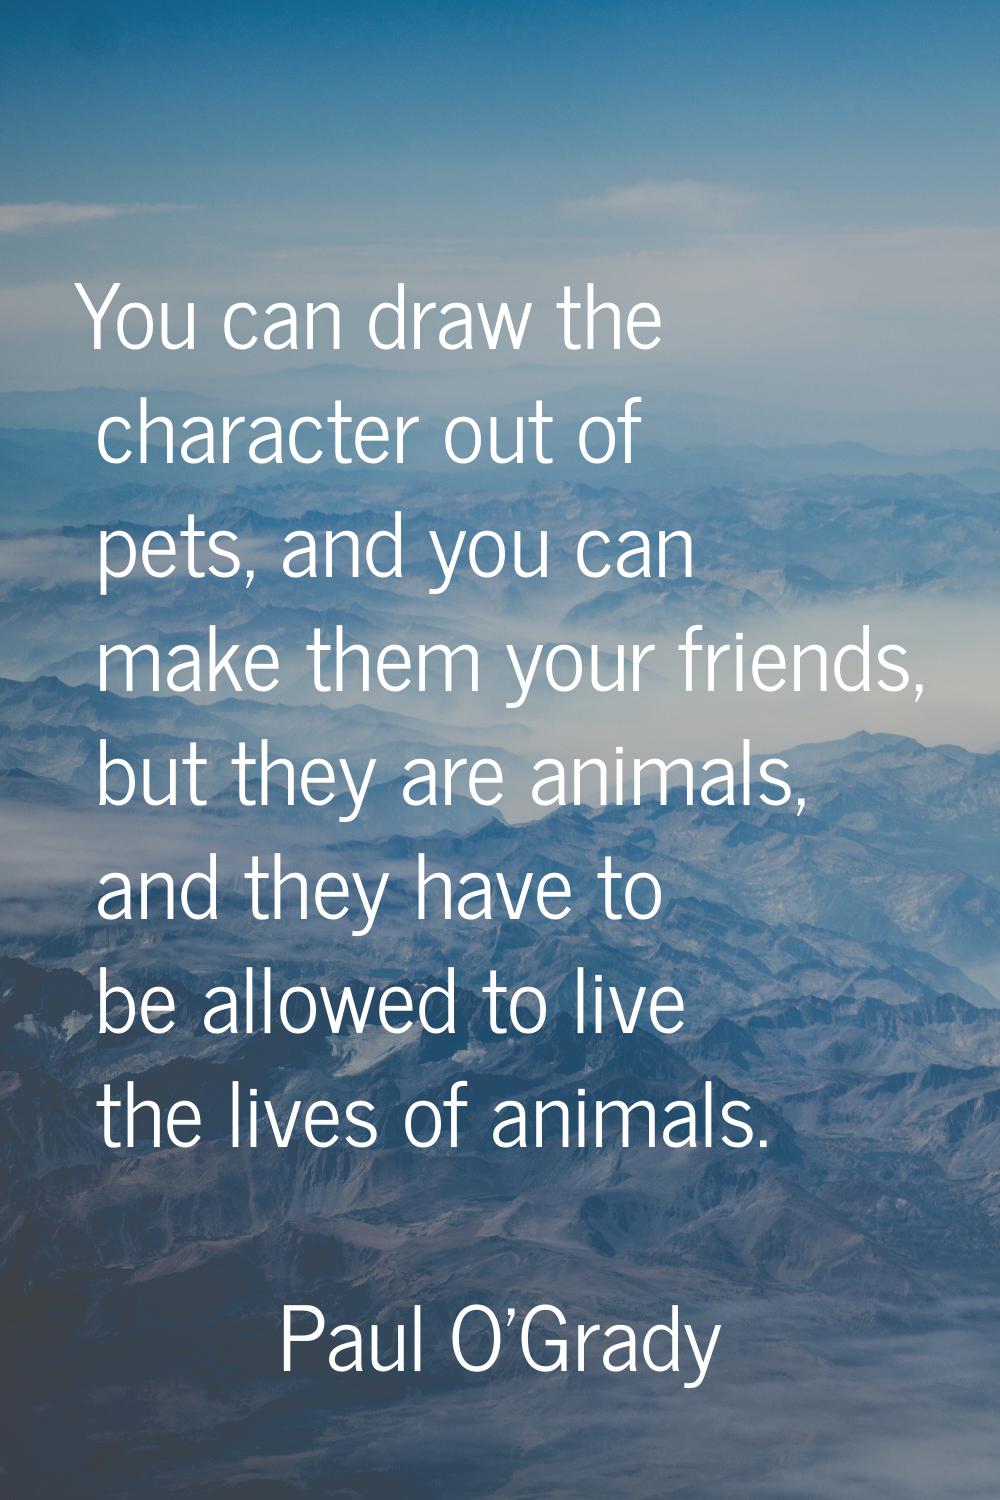 You can draw the character out of pets, and you can make them your friends, but they are animals, a